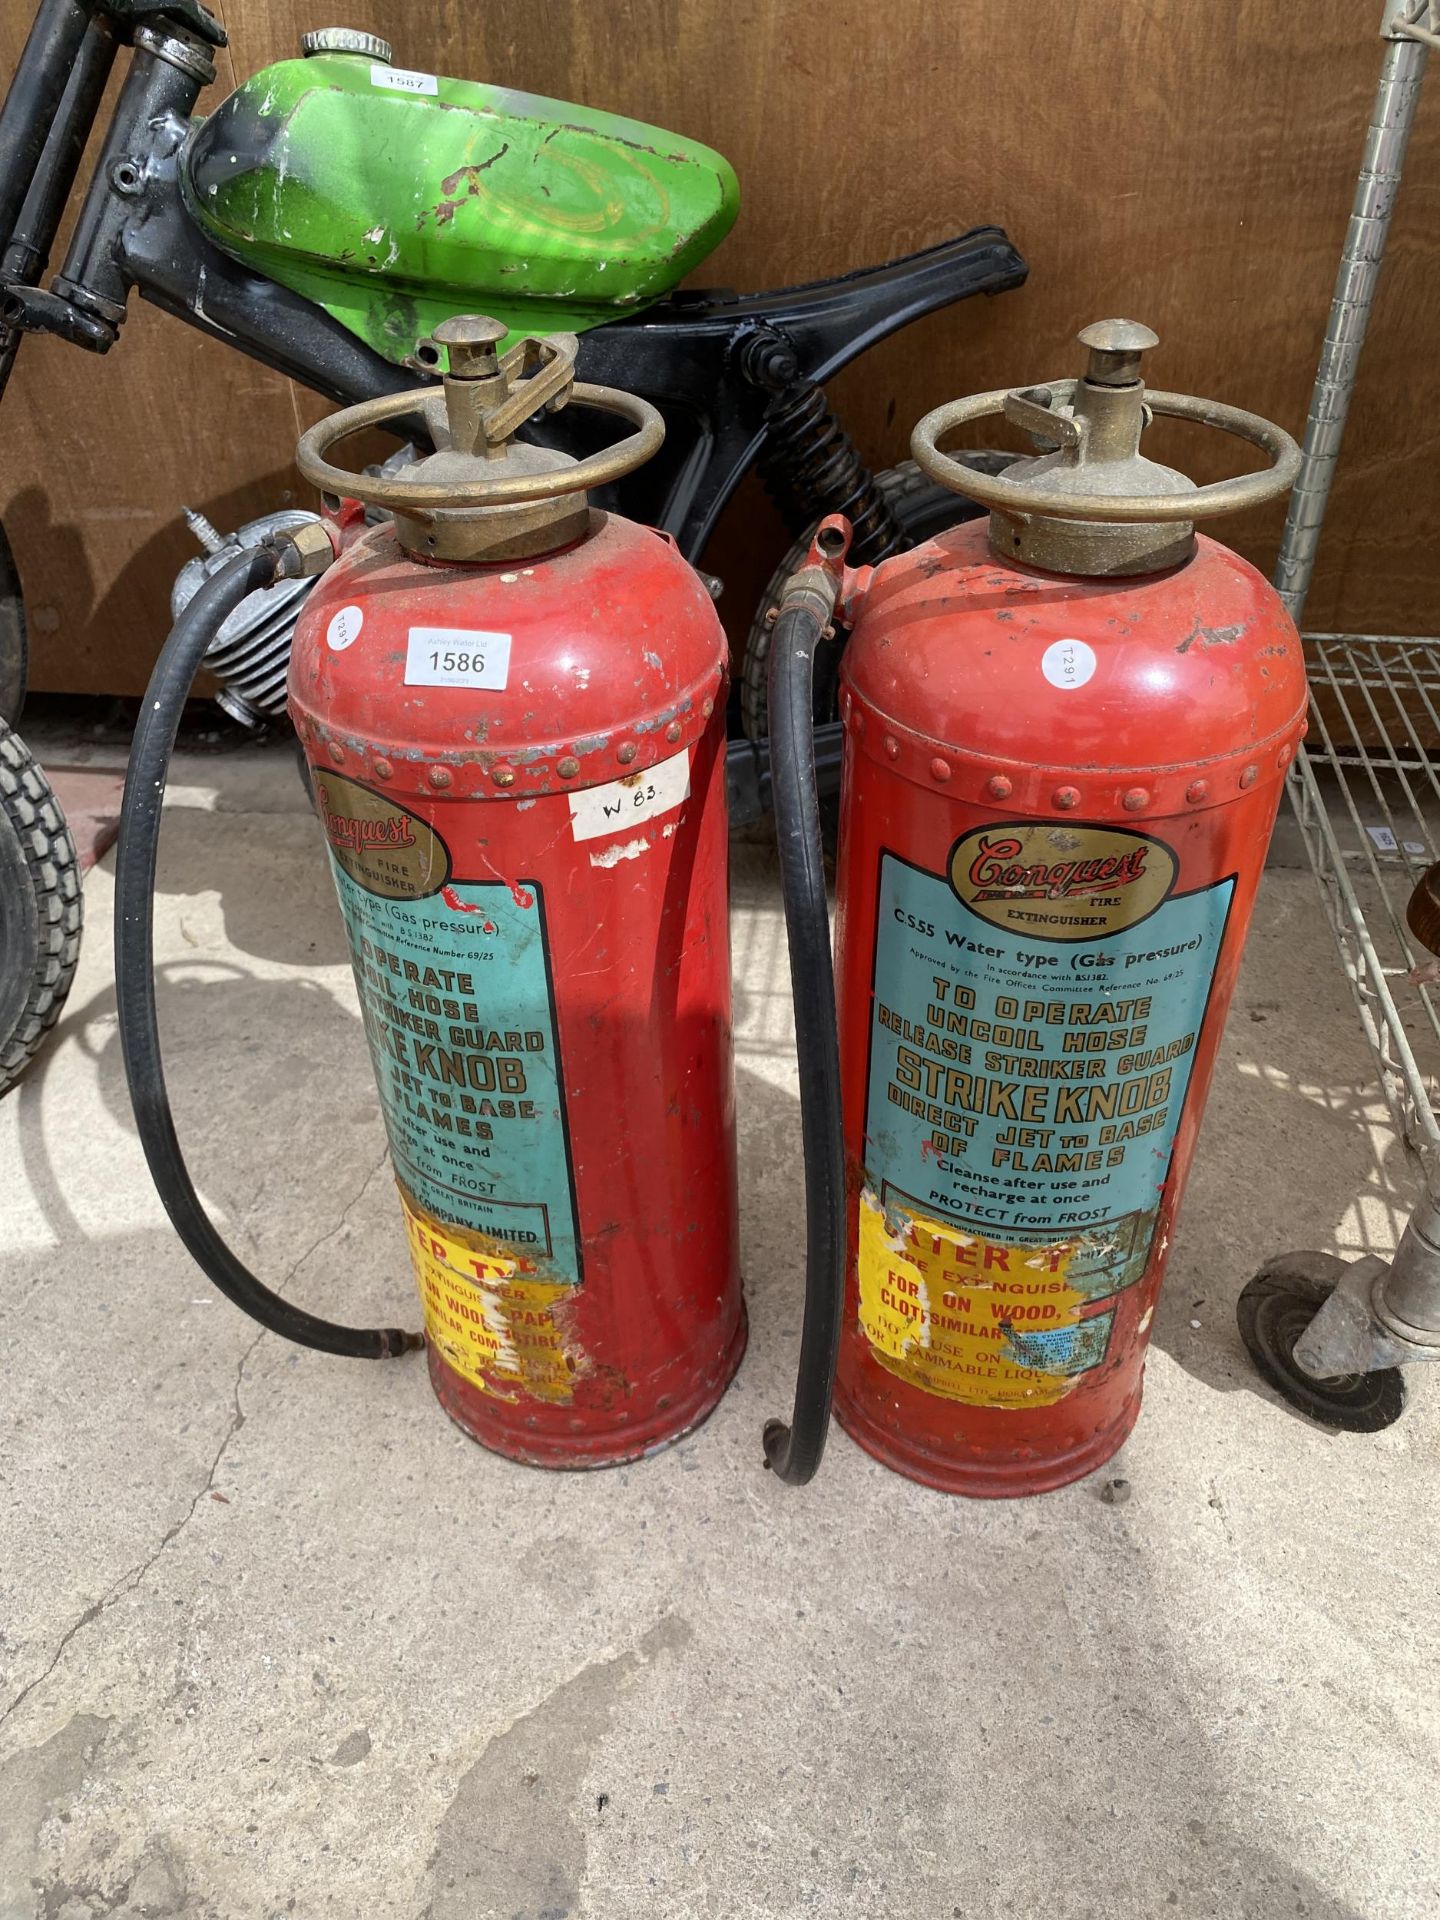 TWO VINTAGE CONQUEST FIRE EXTINGUISHERS